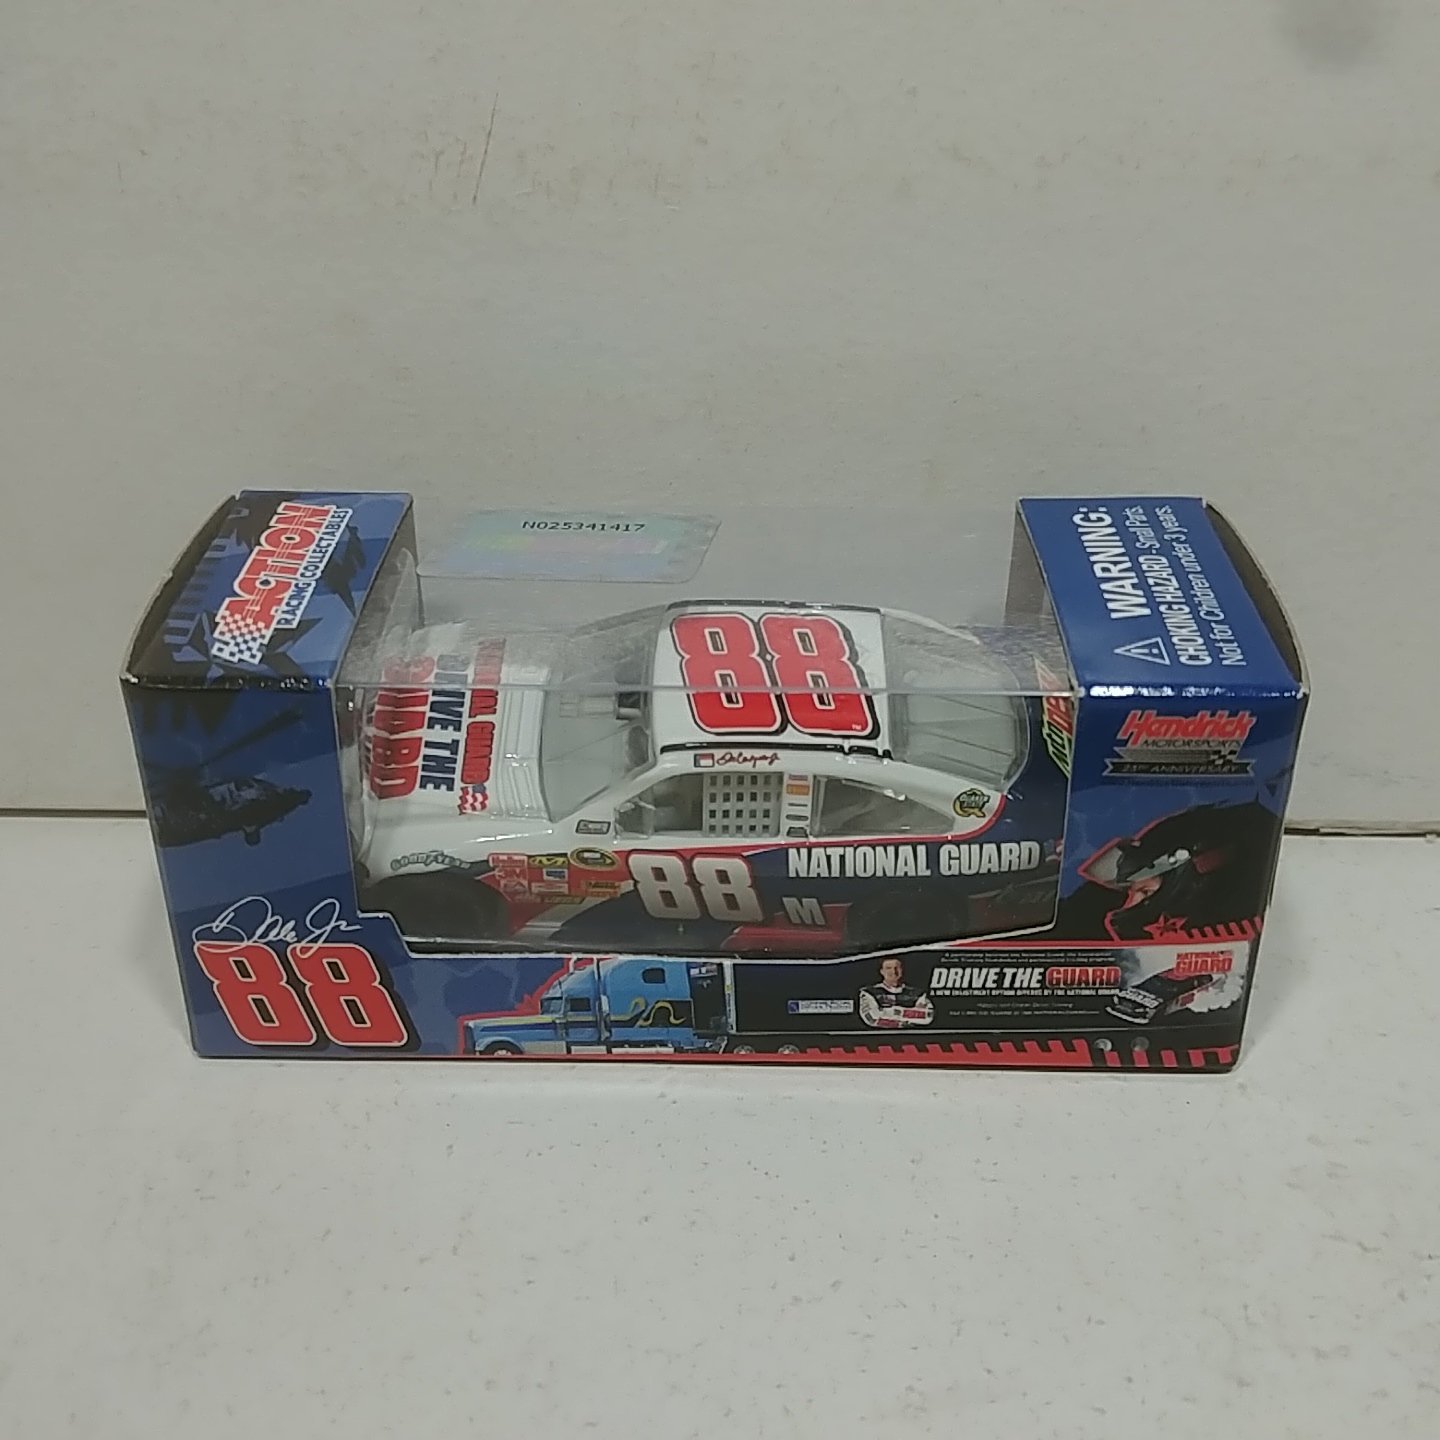 2009 Dale Earnhardt Jr 1/64th National Guard"Drive the Guard" Pitstop Series car